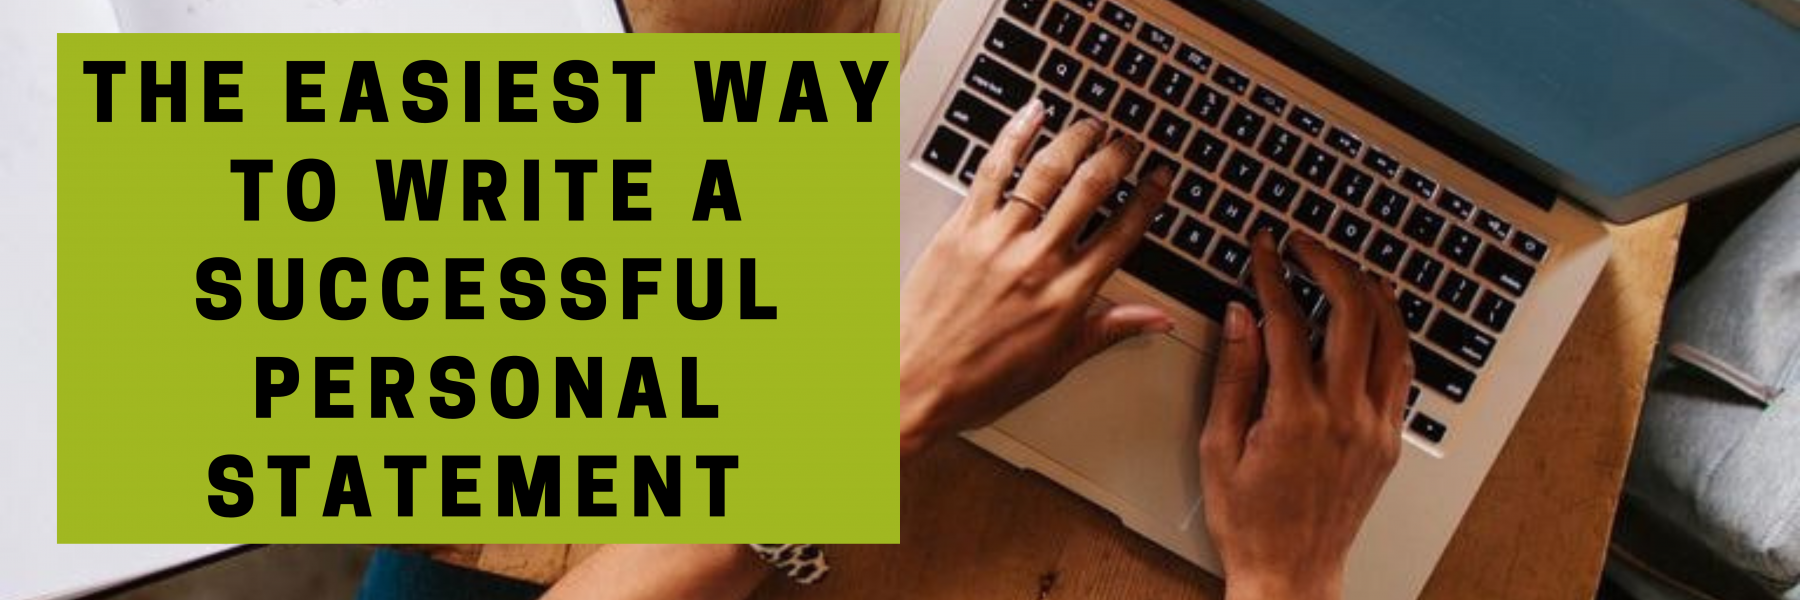 the easiest way to write an impactful personal statement